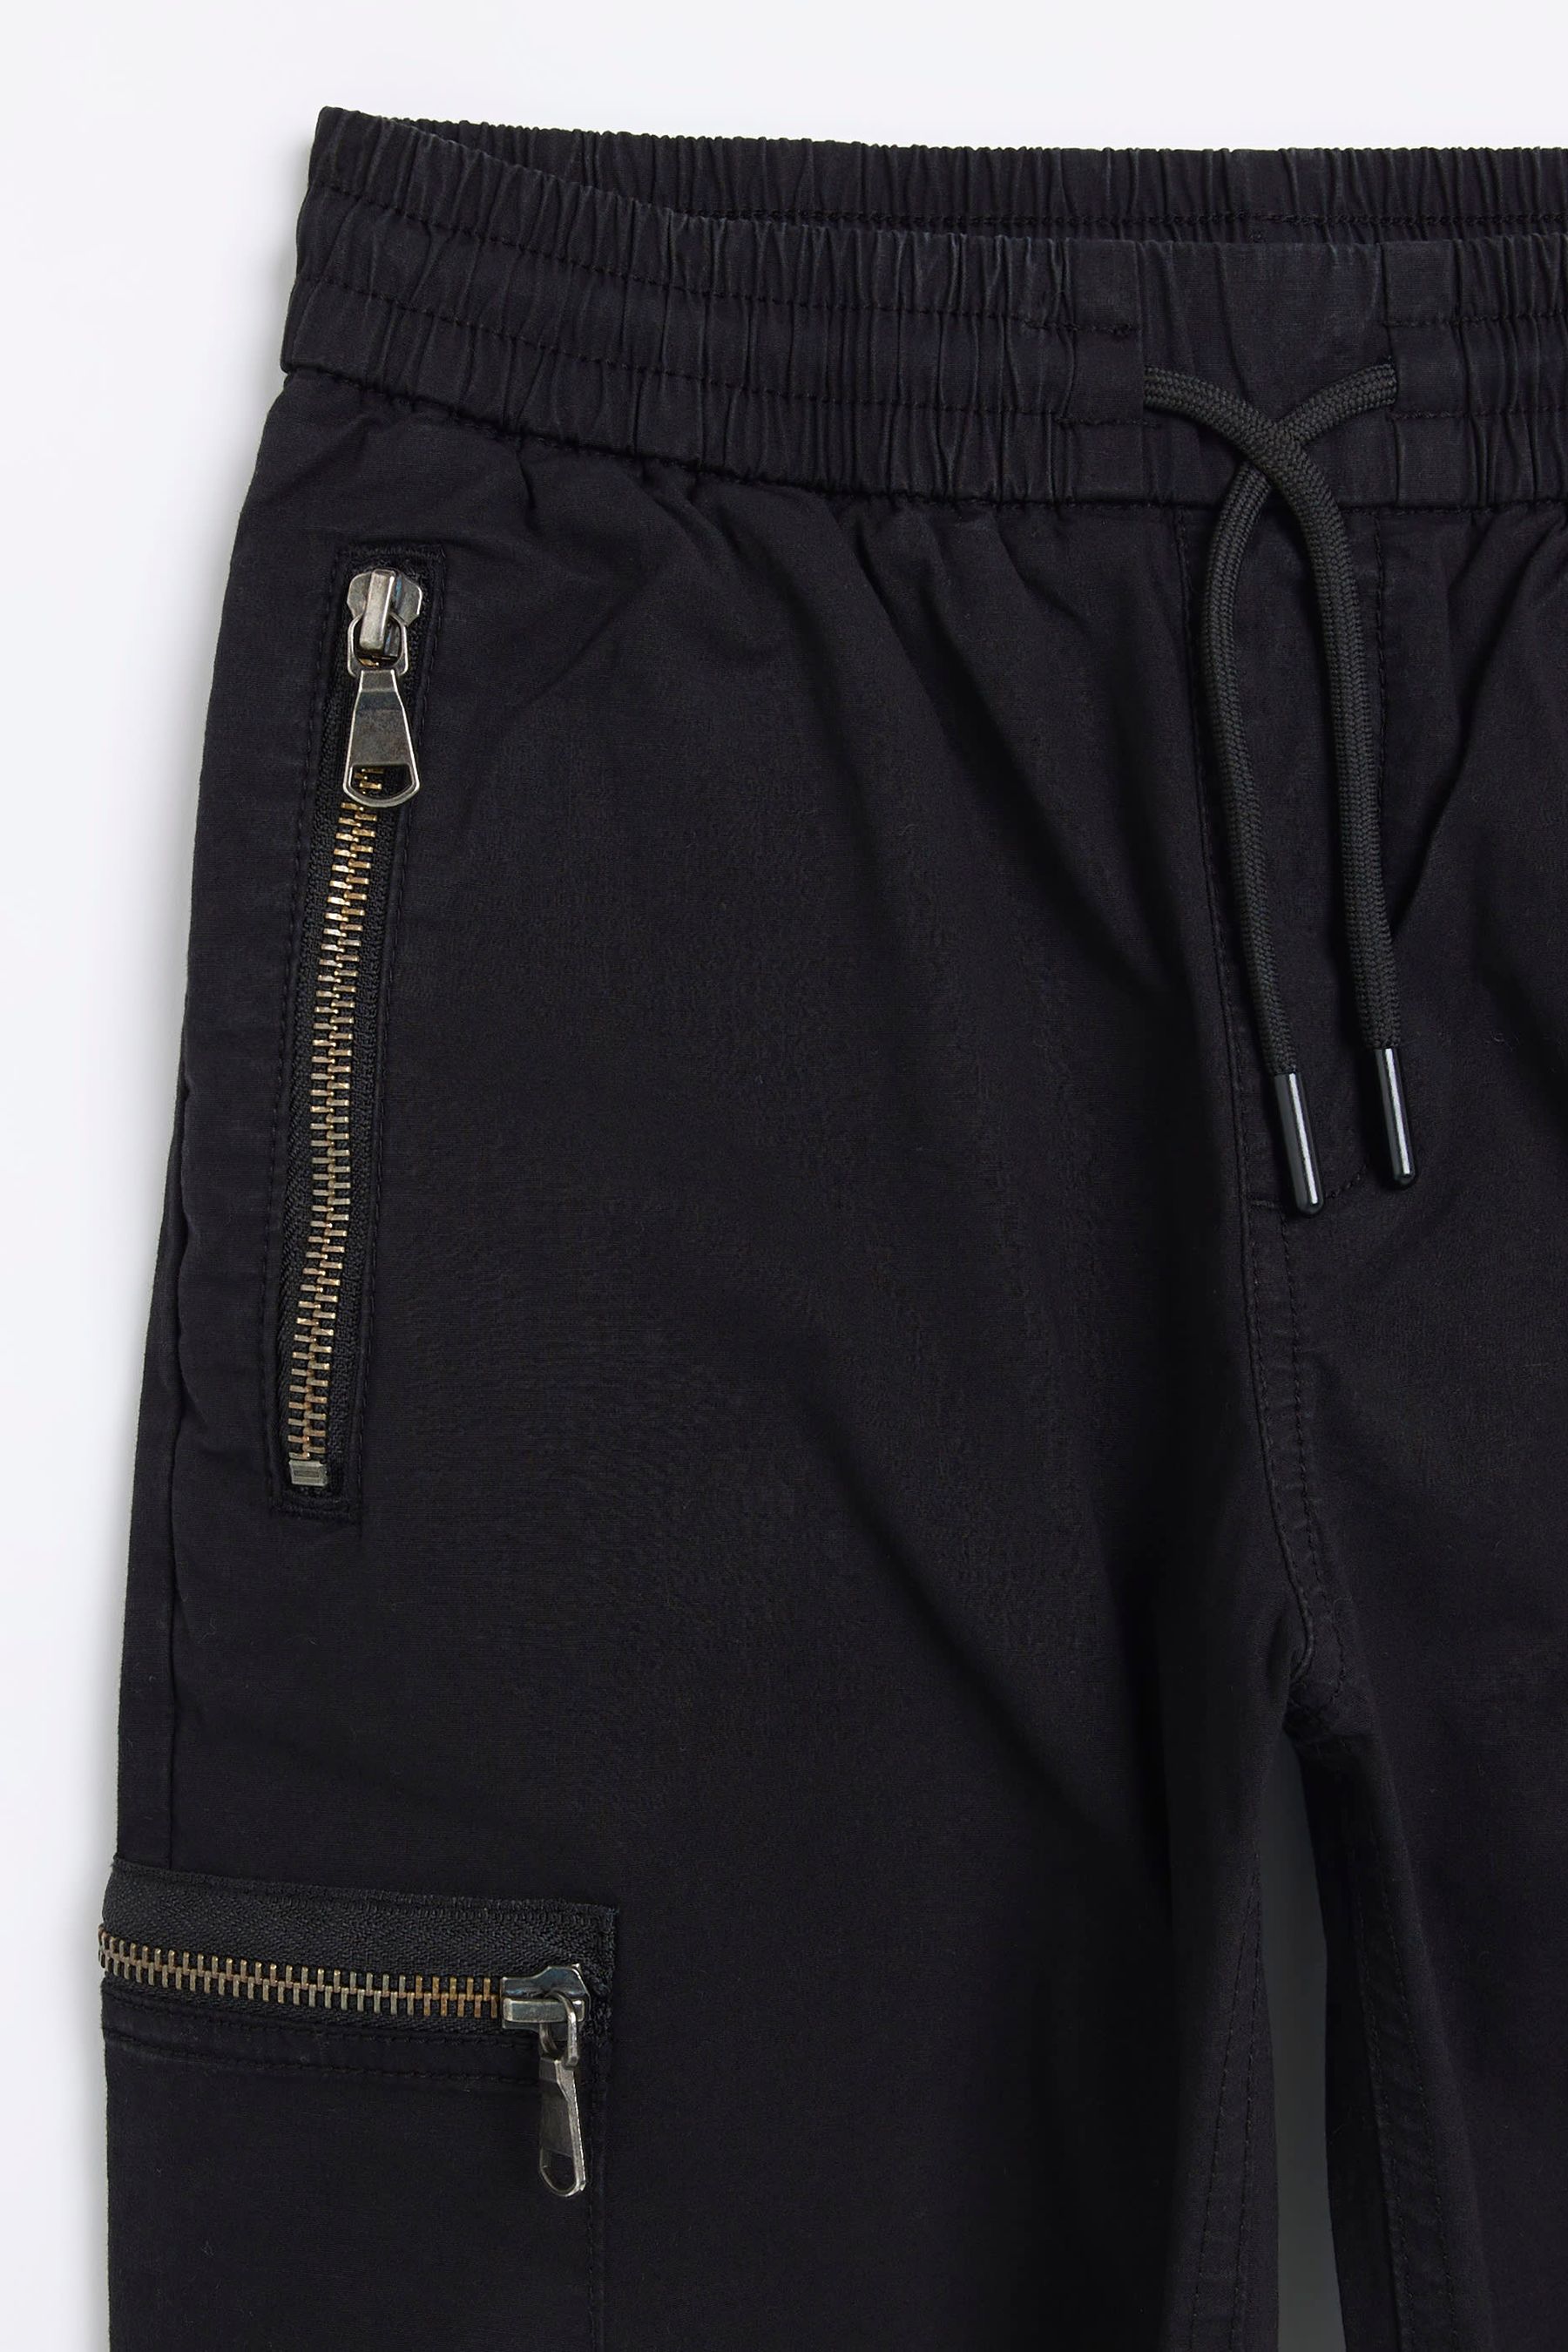 Buy River Island Boys Black Zippy Trousers from the Next UK online shop